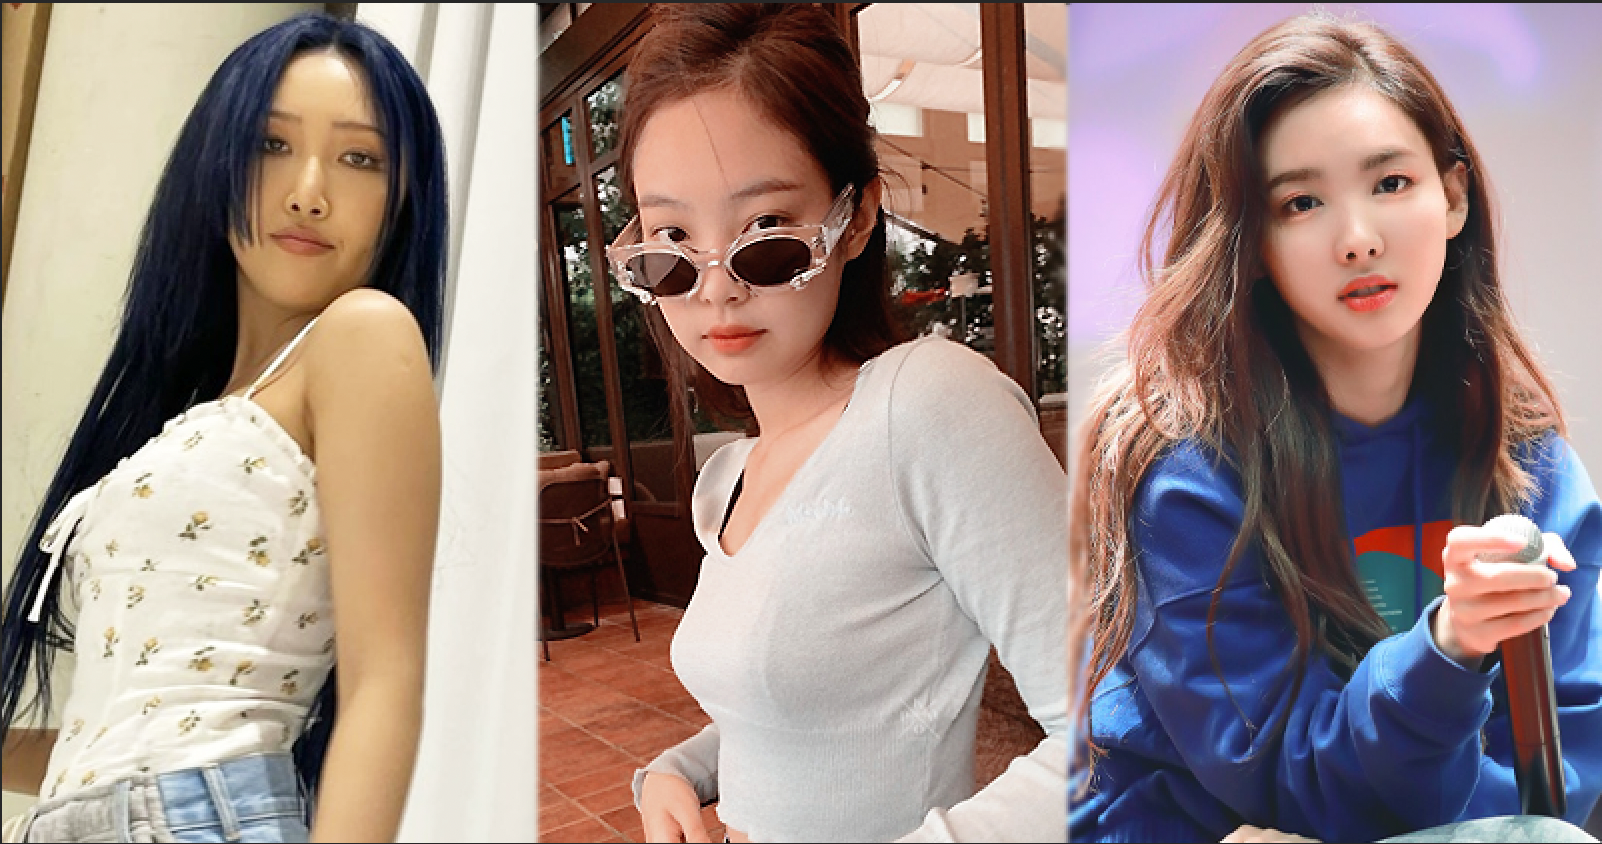 These Idols Are the Current “It Girls” of K-Pop, According to Netizens